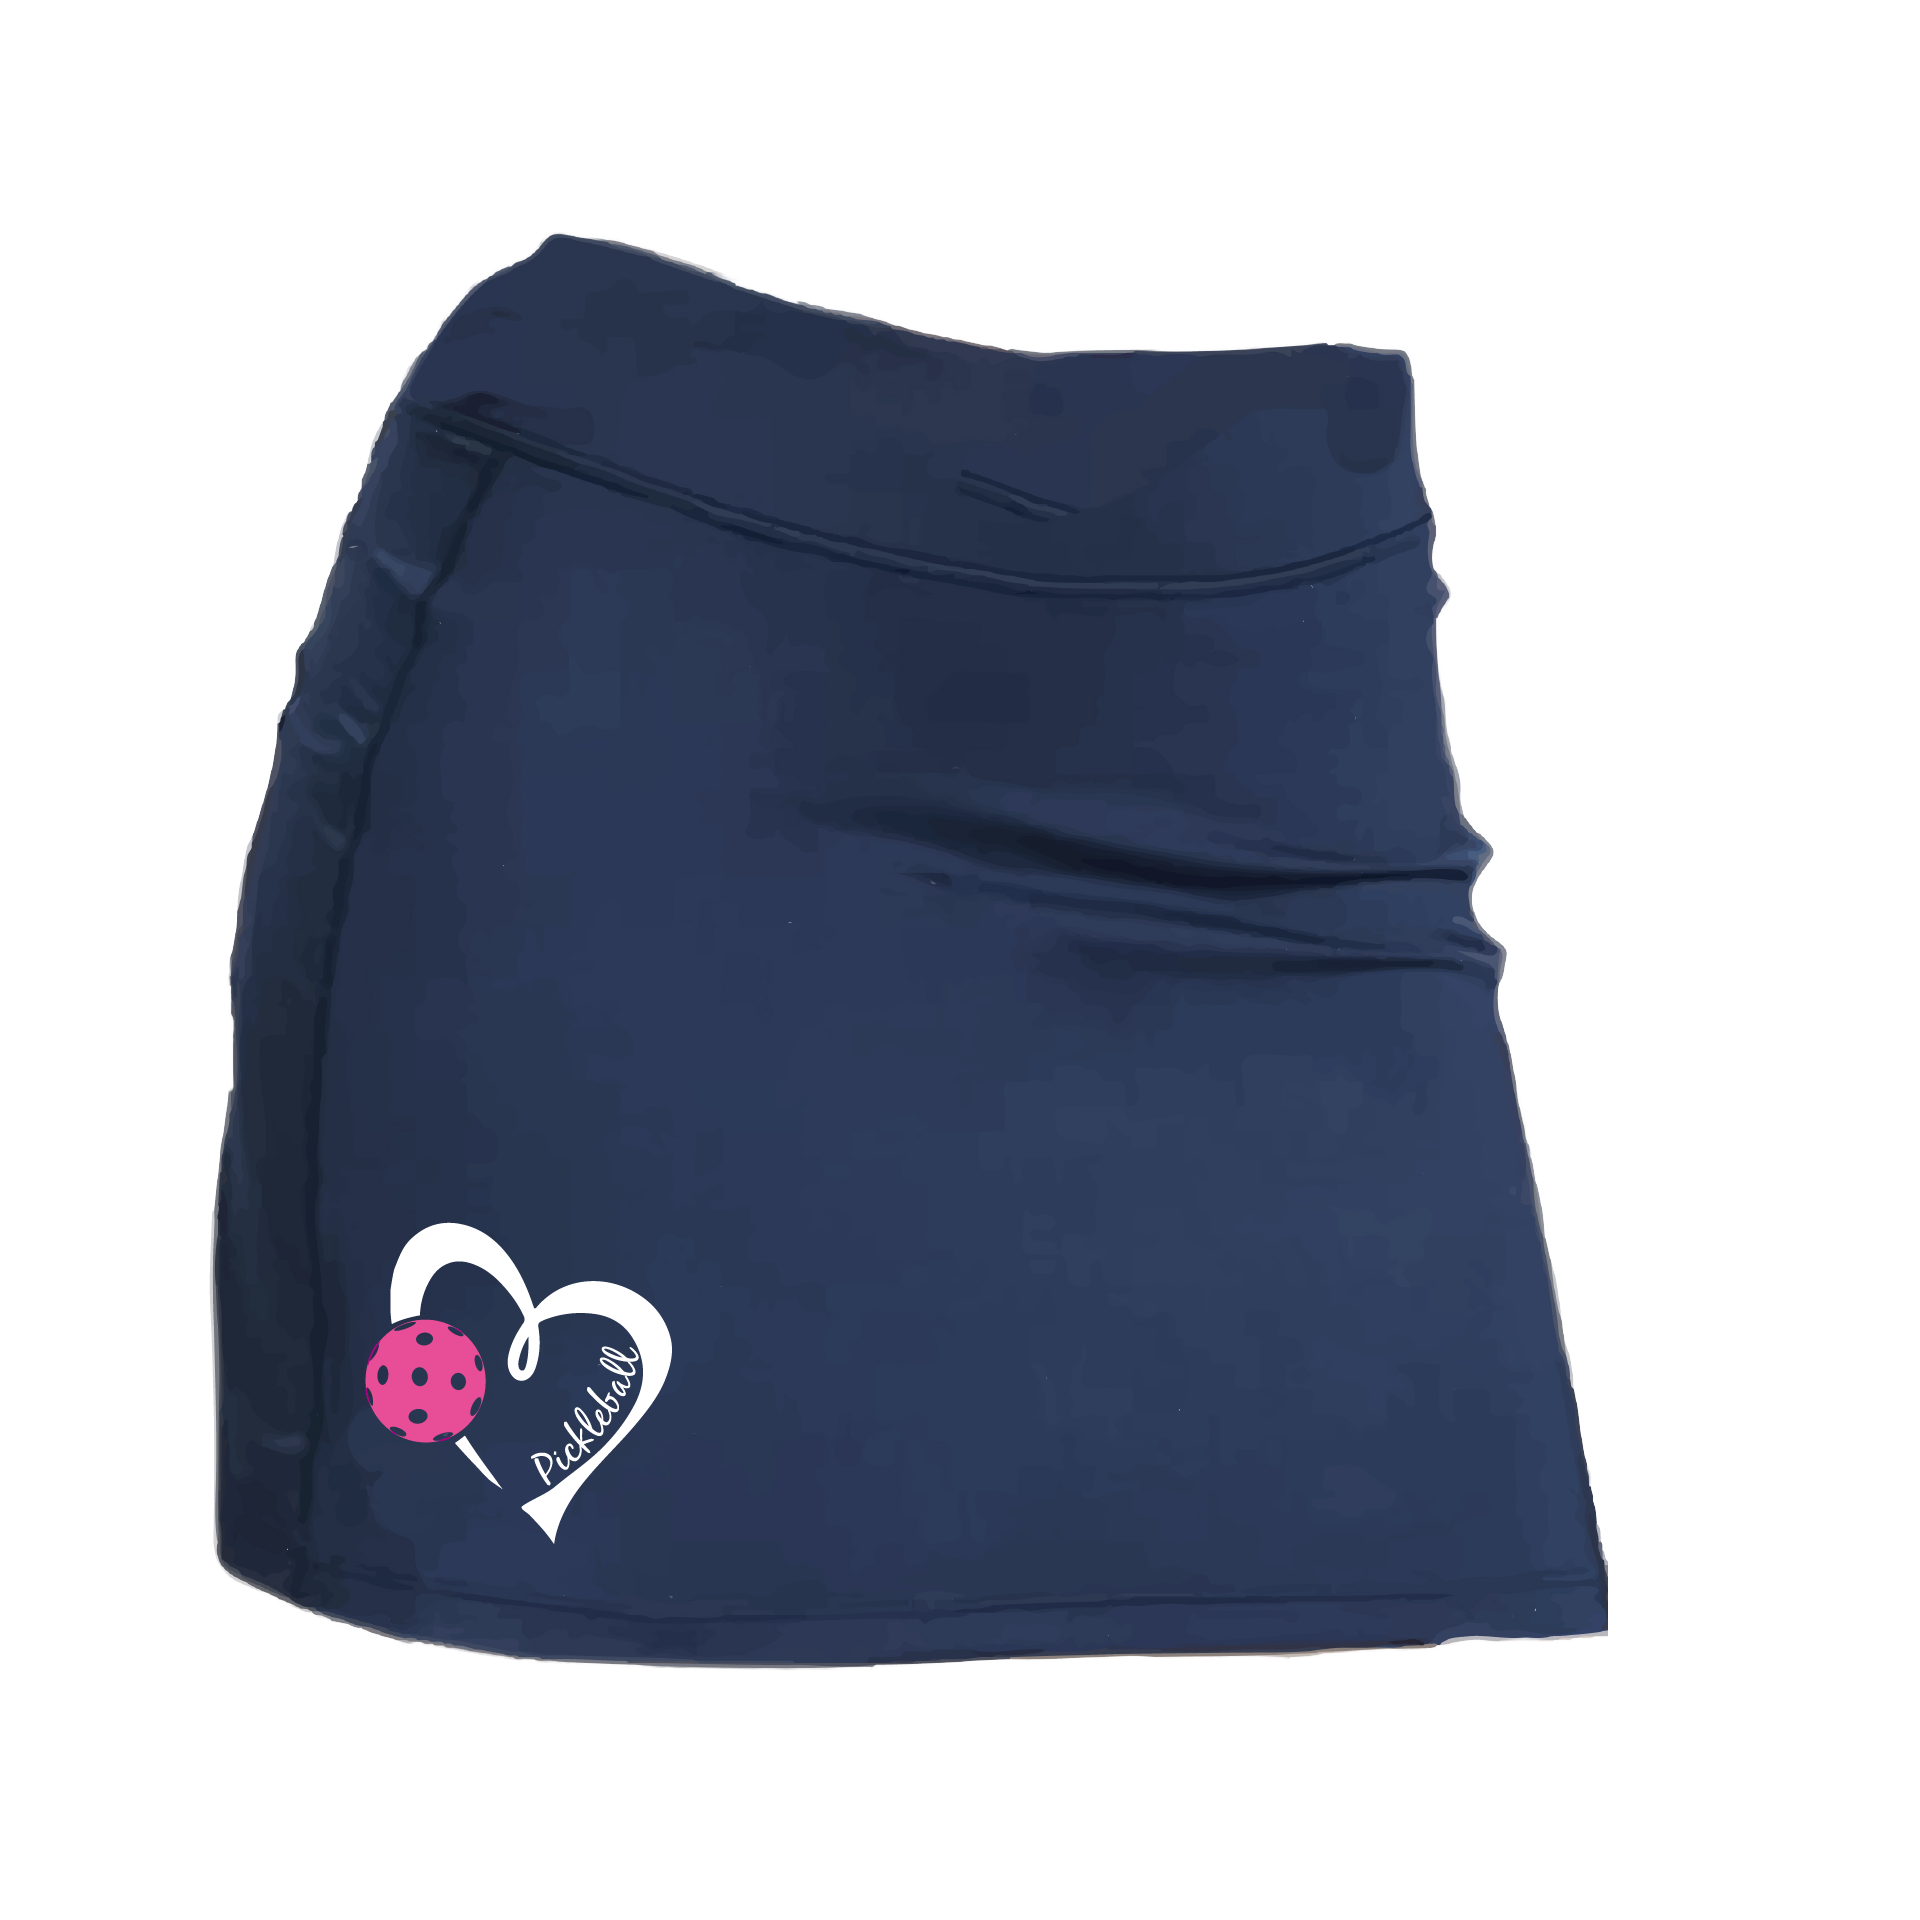 Pickleball Design: Heart with Pickleball  Women’s core active jersey-knit skort comes with built-in shorts made out of a poly-spandex blend that will keep your legs from rubbing together, without which often results in painful chafing. You can also feel secure knowing that no matter how strenuous the exercise, the skort will remain in place (it won’t ride up!). The fabric is breathable, featuring Dri-Works wicking technology.